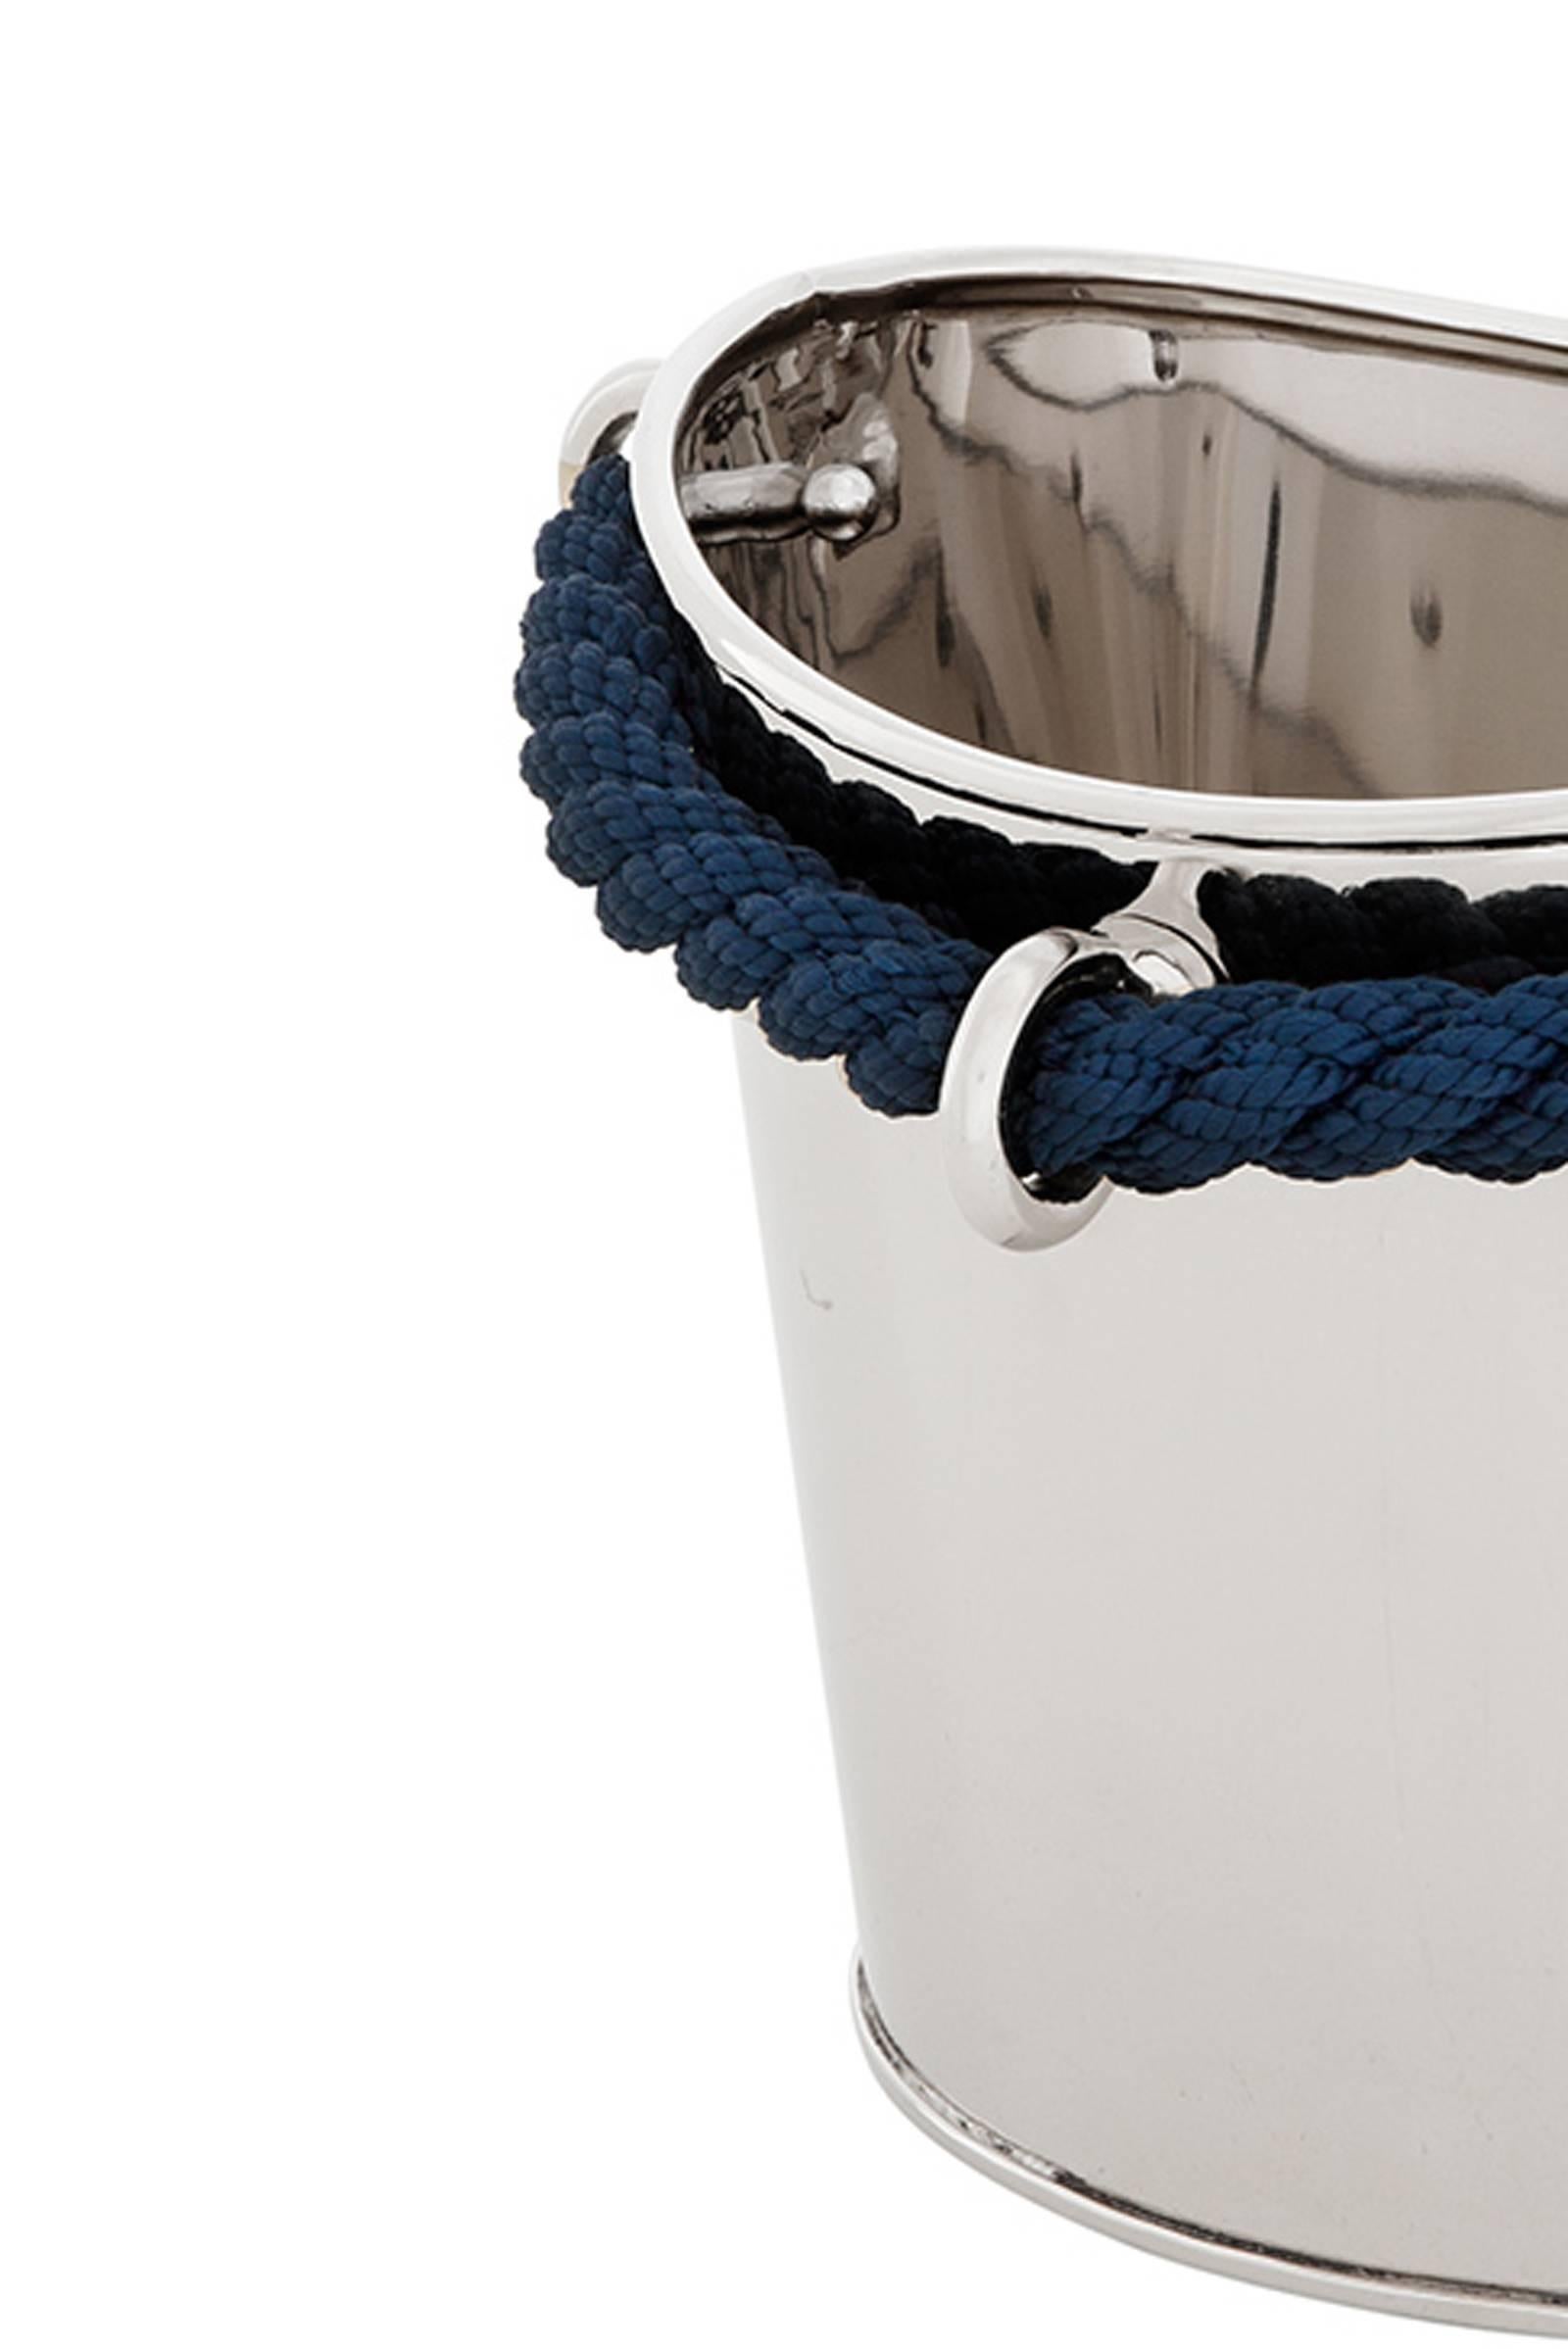 Champagne cooler in nickel finish 
with blue boat cord, ideal for Yachting.
